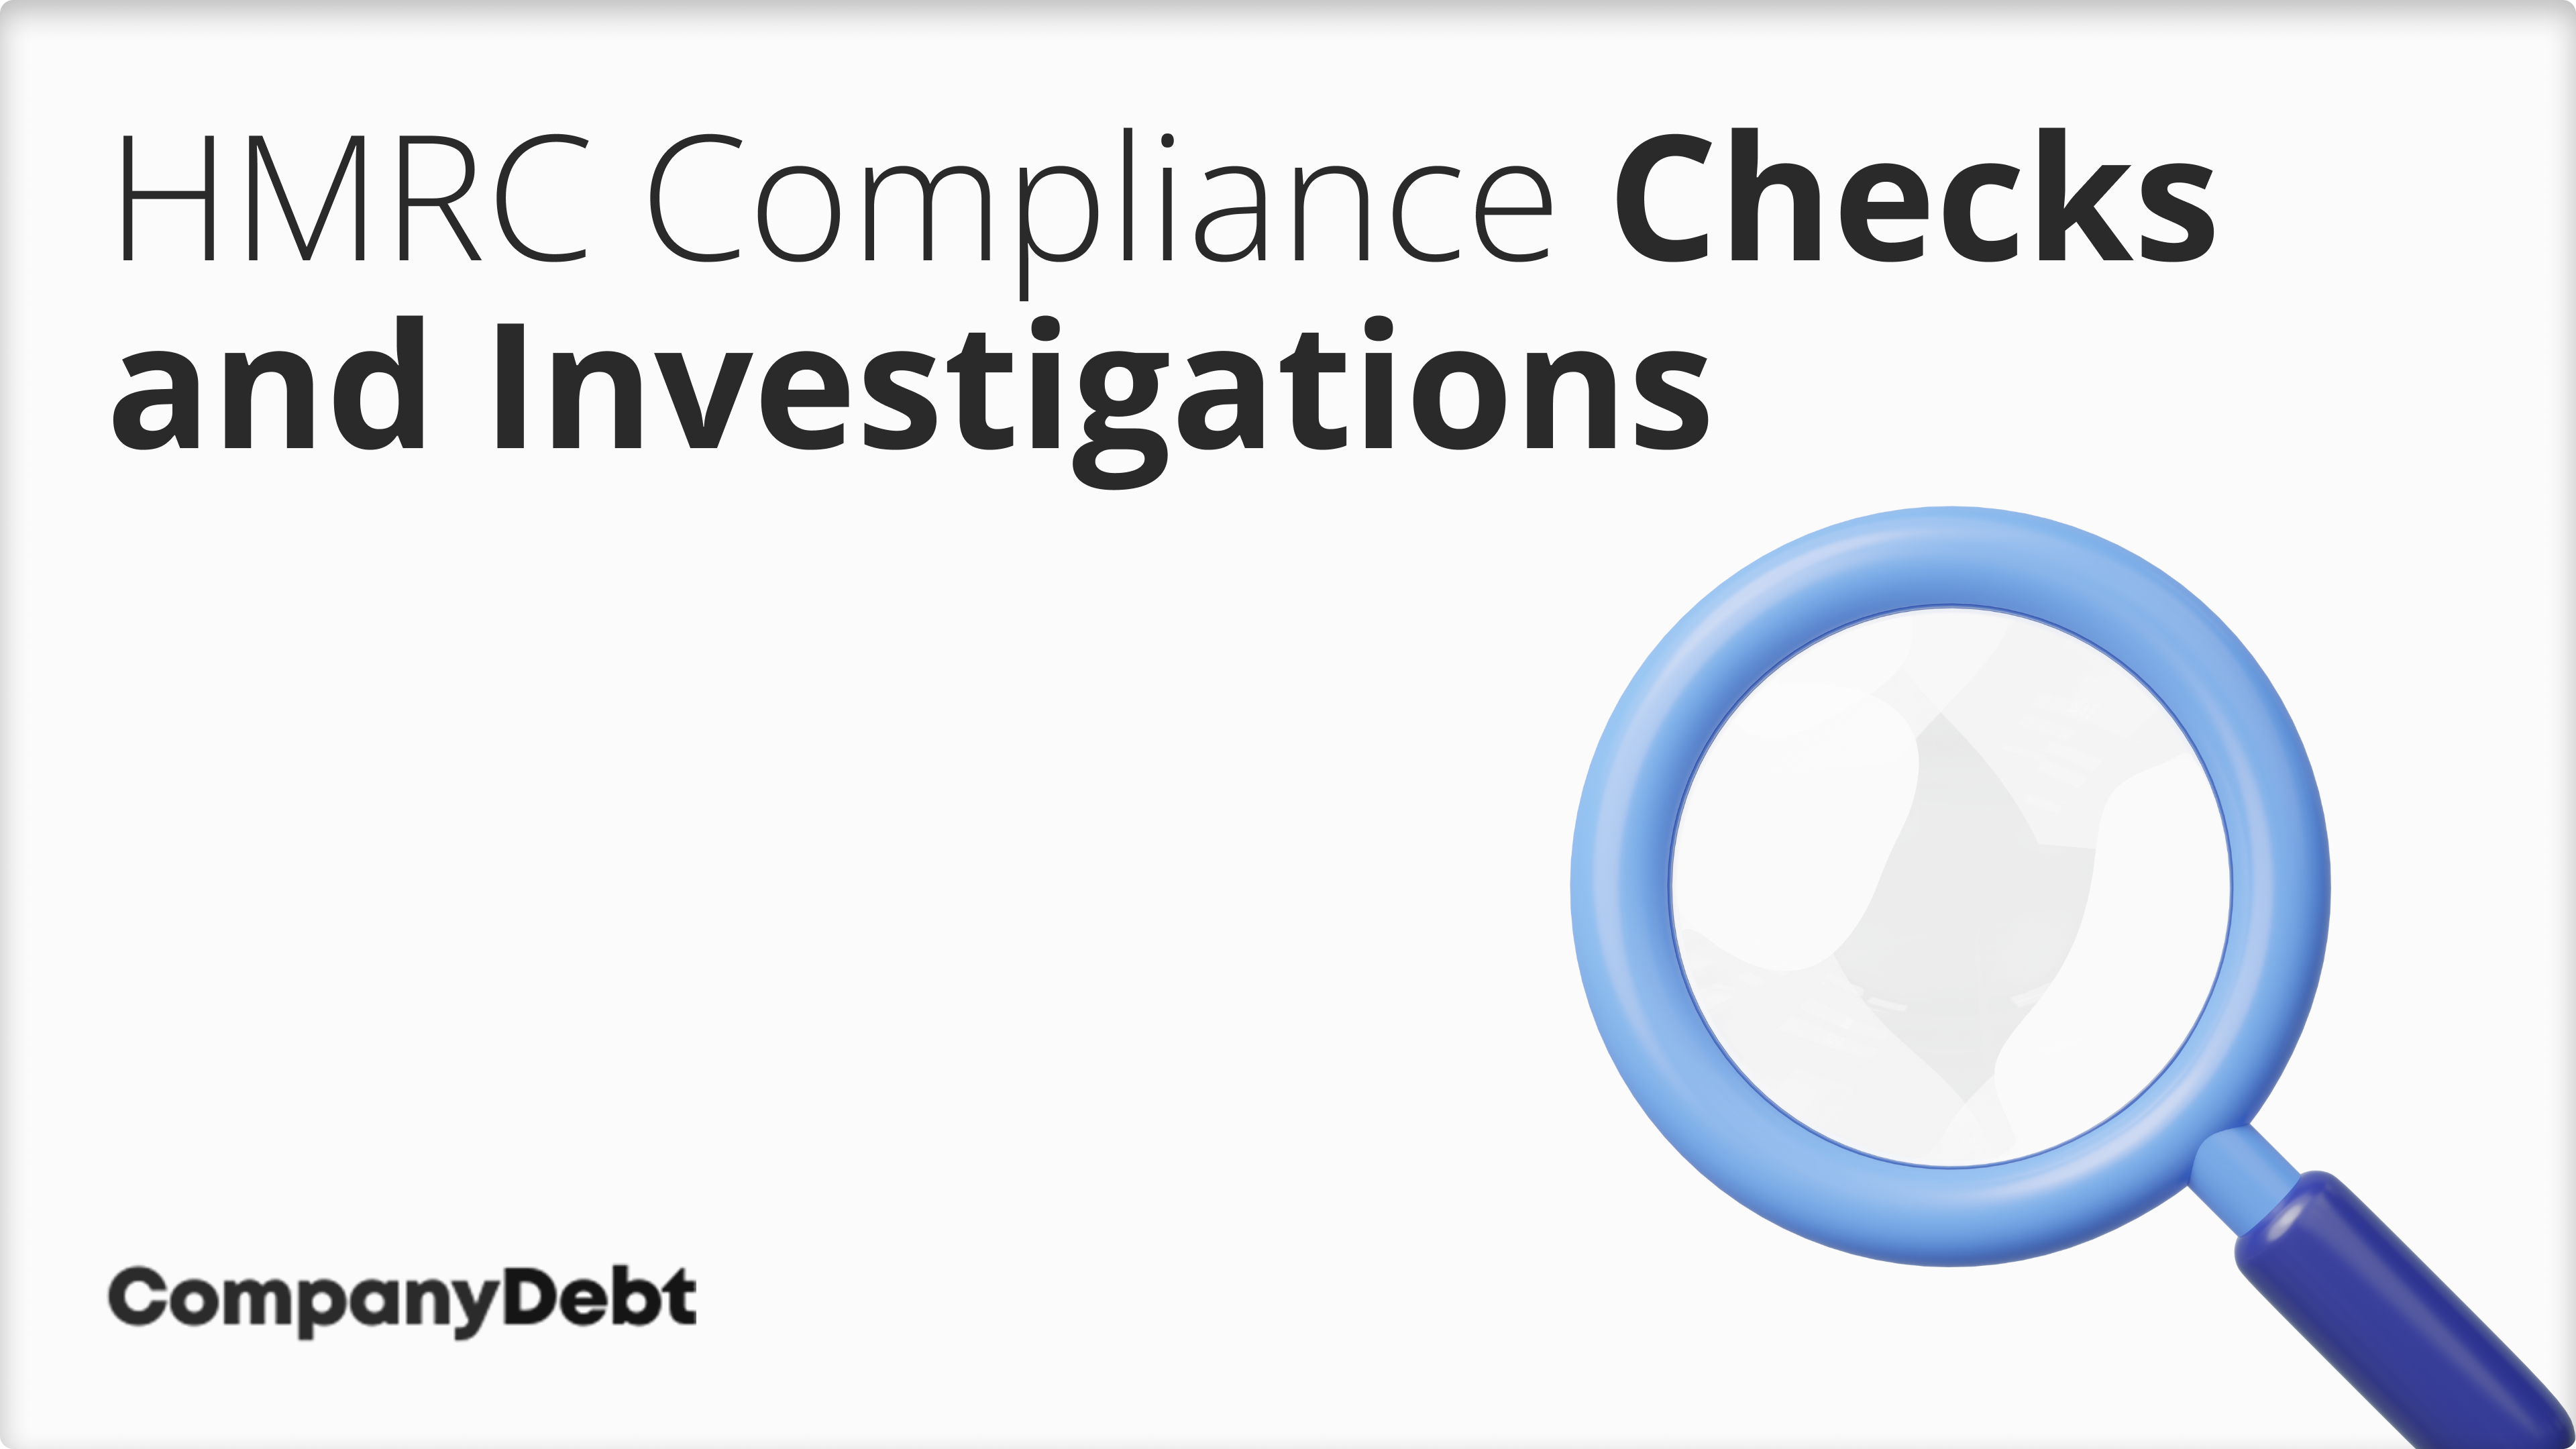 What Should you do if HMRC Contacts you About a Compliance Check?